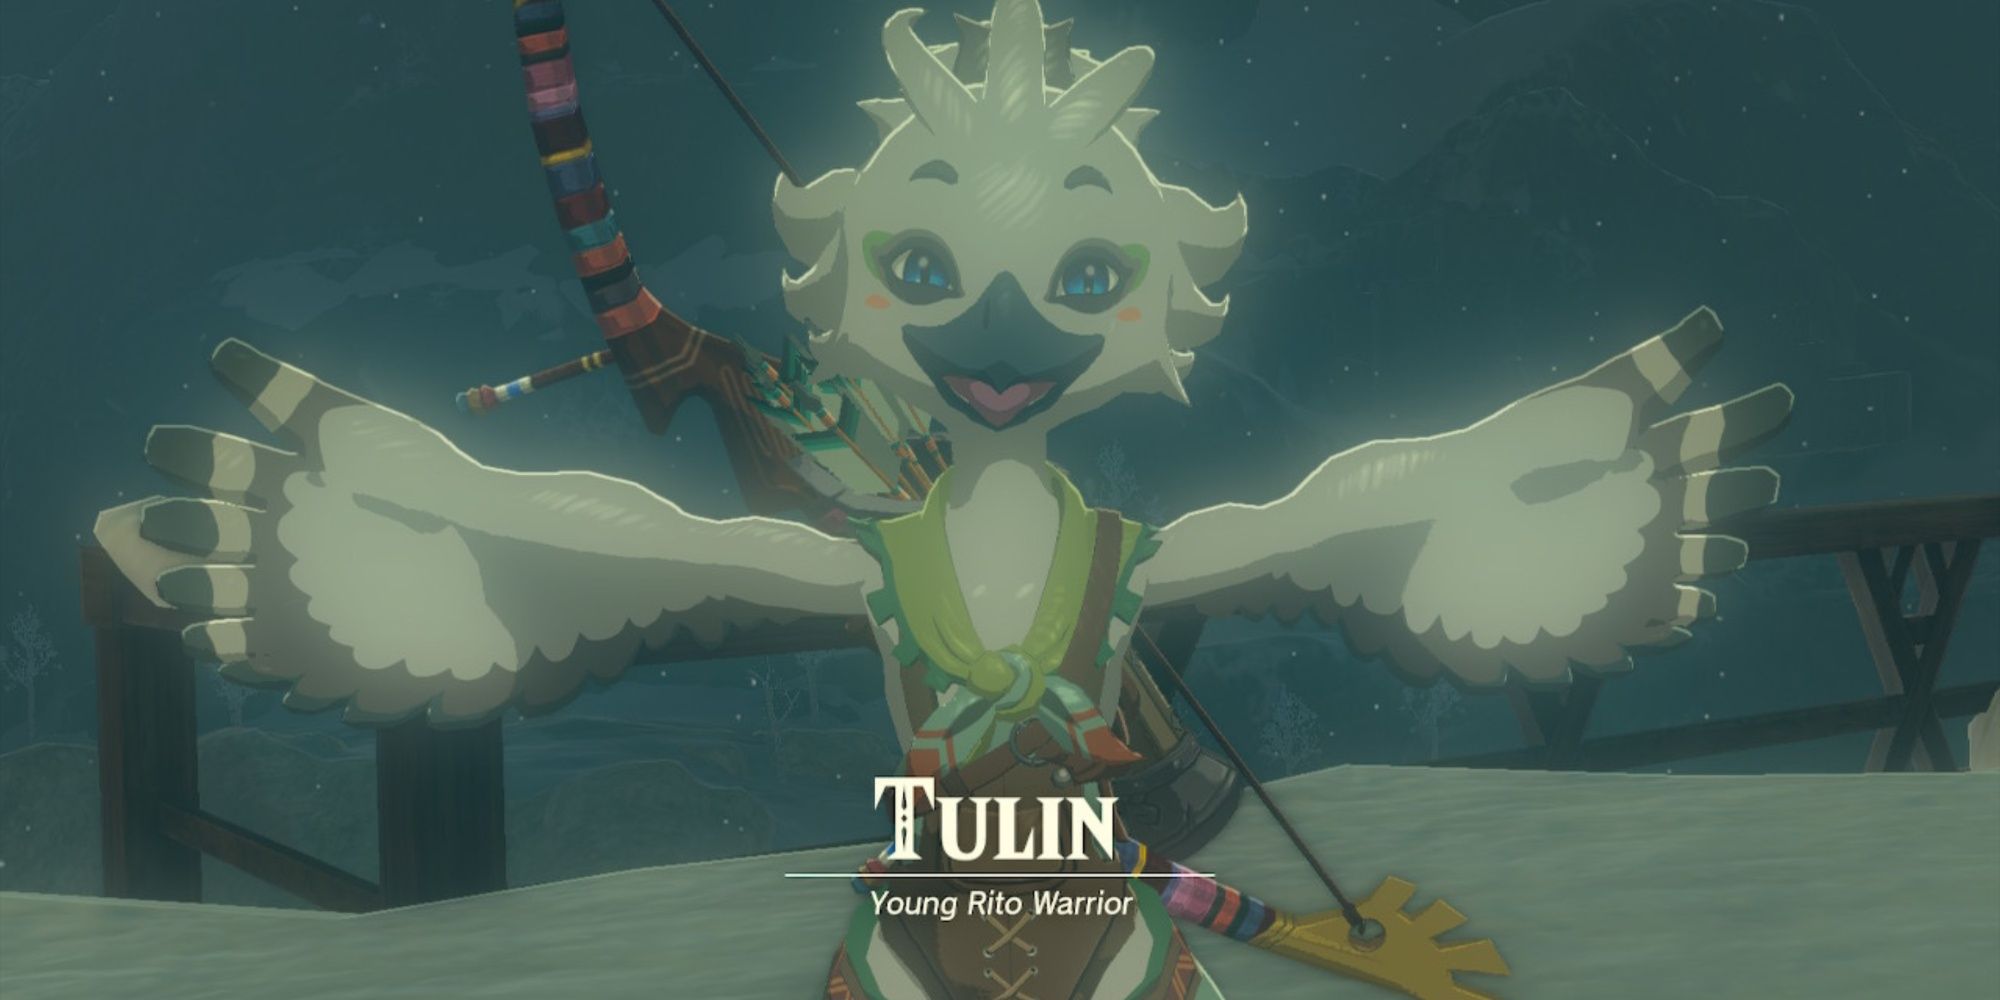 Tulin spreads his wings with title card below in The Legend Of Zelda: Tears of the Kingdom.